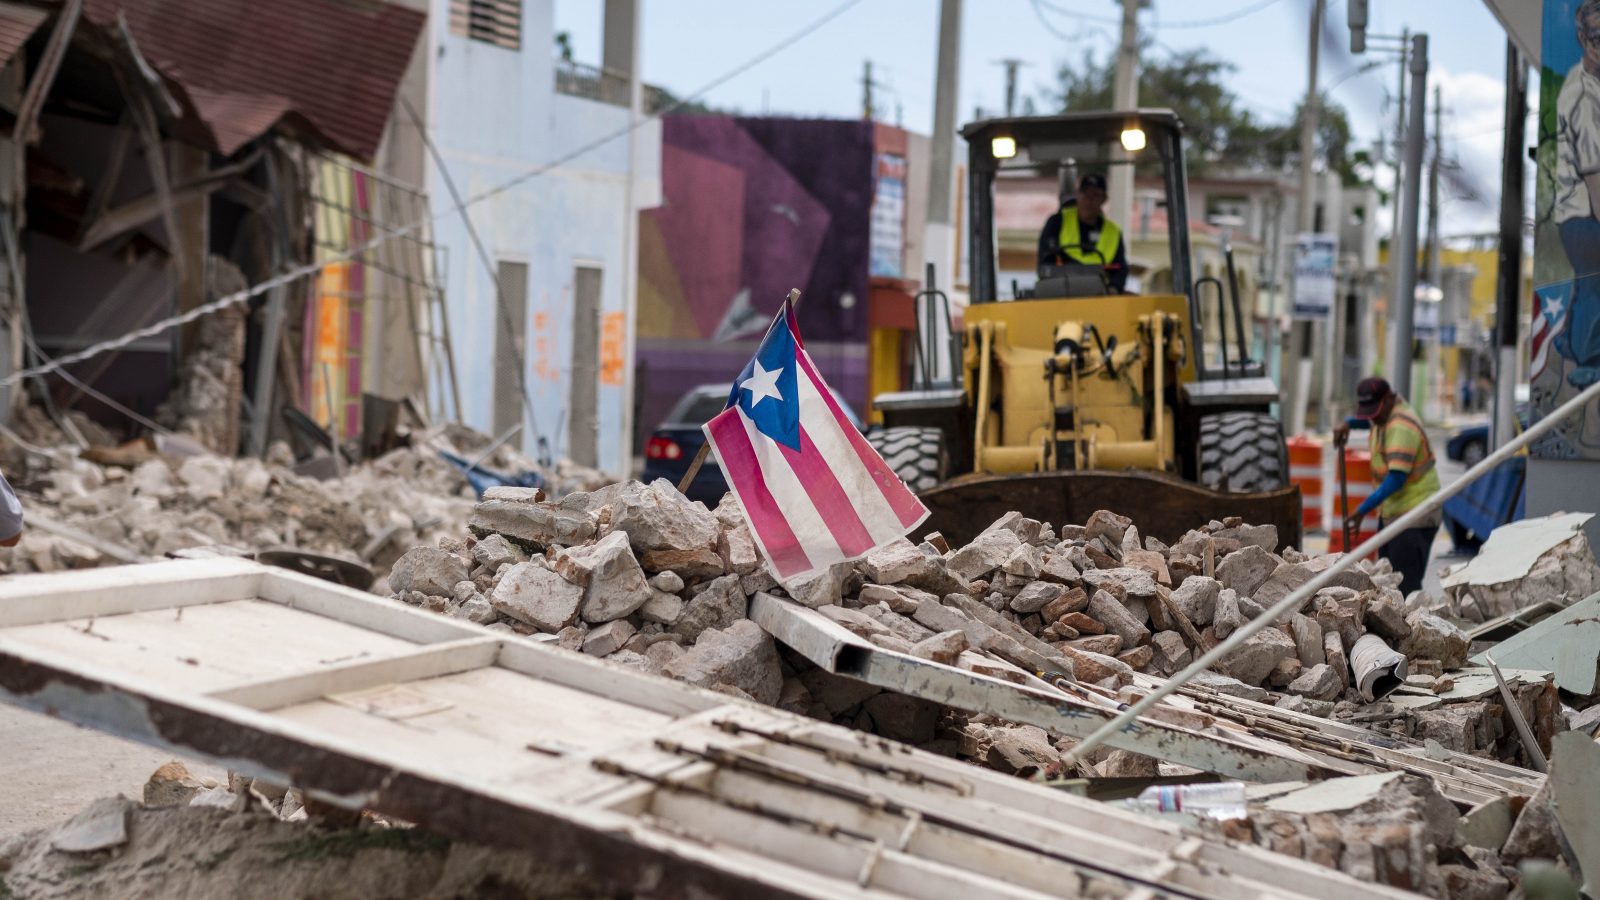 Debris is removed from a main road in Guanica, Puerto Rico, after the quakes. RICARDO ARDUENGO / AFP via Getty Images